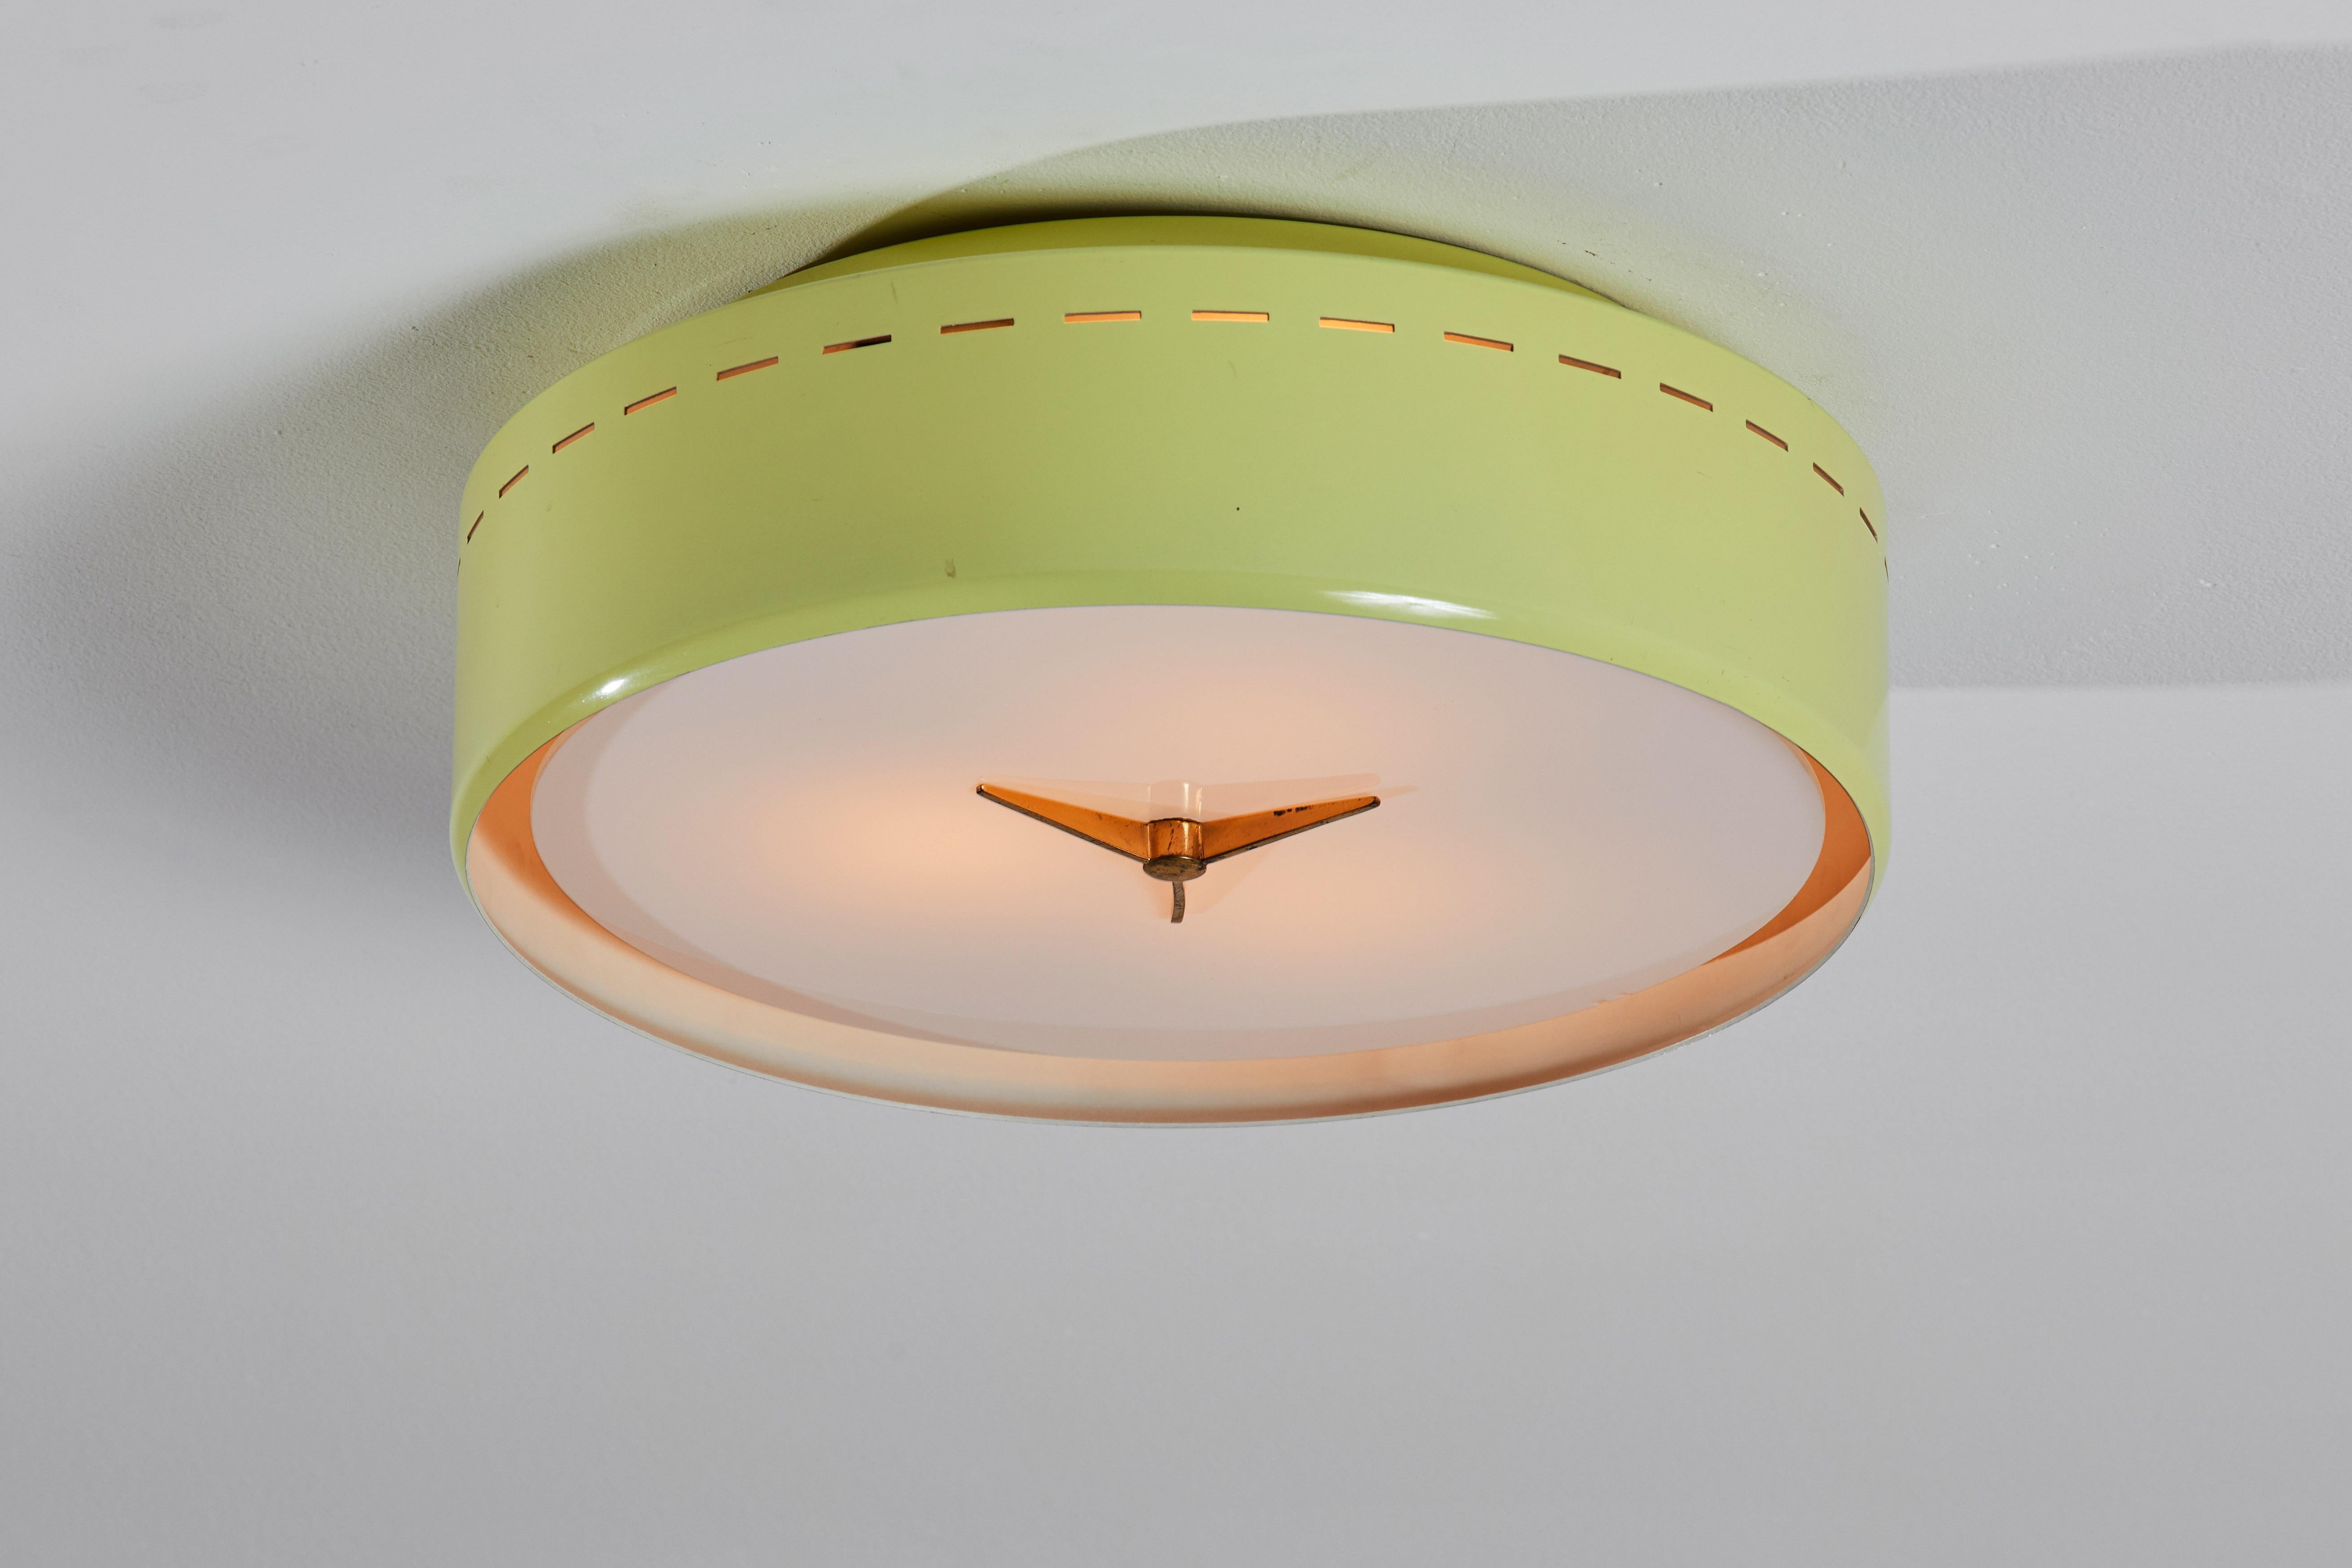 Flush mount ceiling light by Stilnovo. Manufactured in Italy, circa 1960s. Lacquered aluminum, brass and opaline glass. Retains original manufacturer's label. Takes three E27 60w maximum Edison bulbs. Bulbs provided as a one time courtesy.